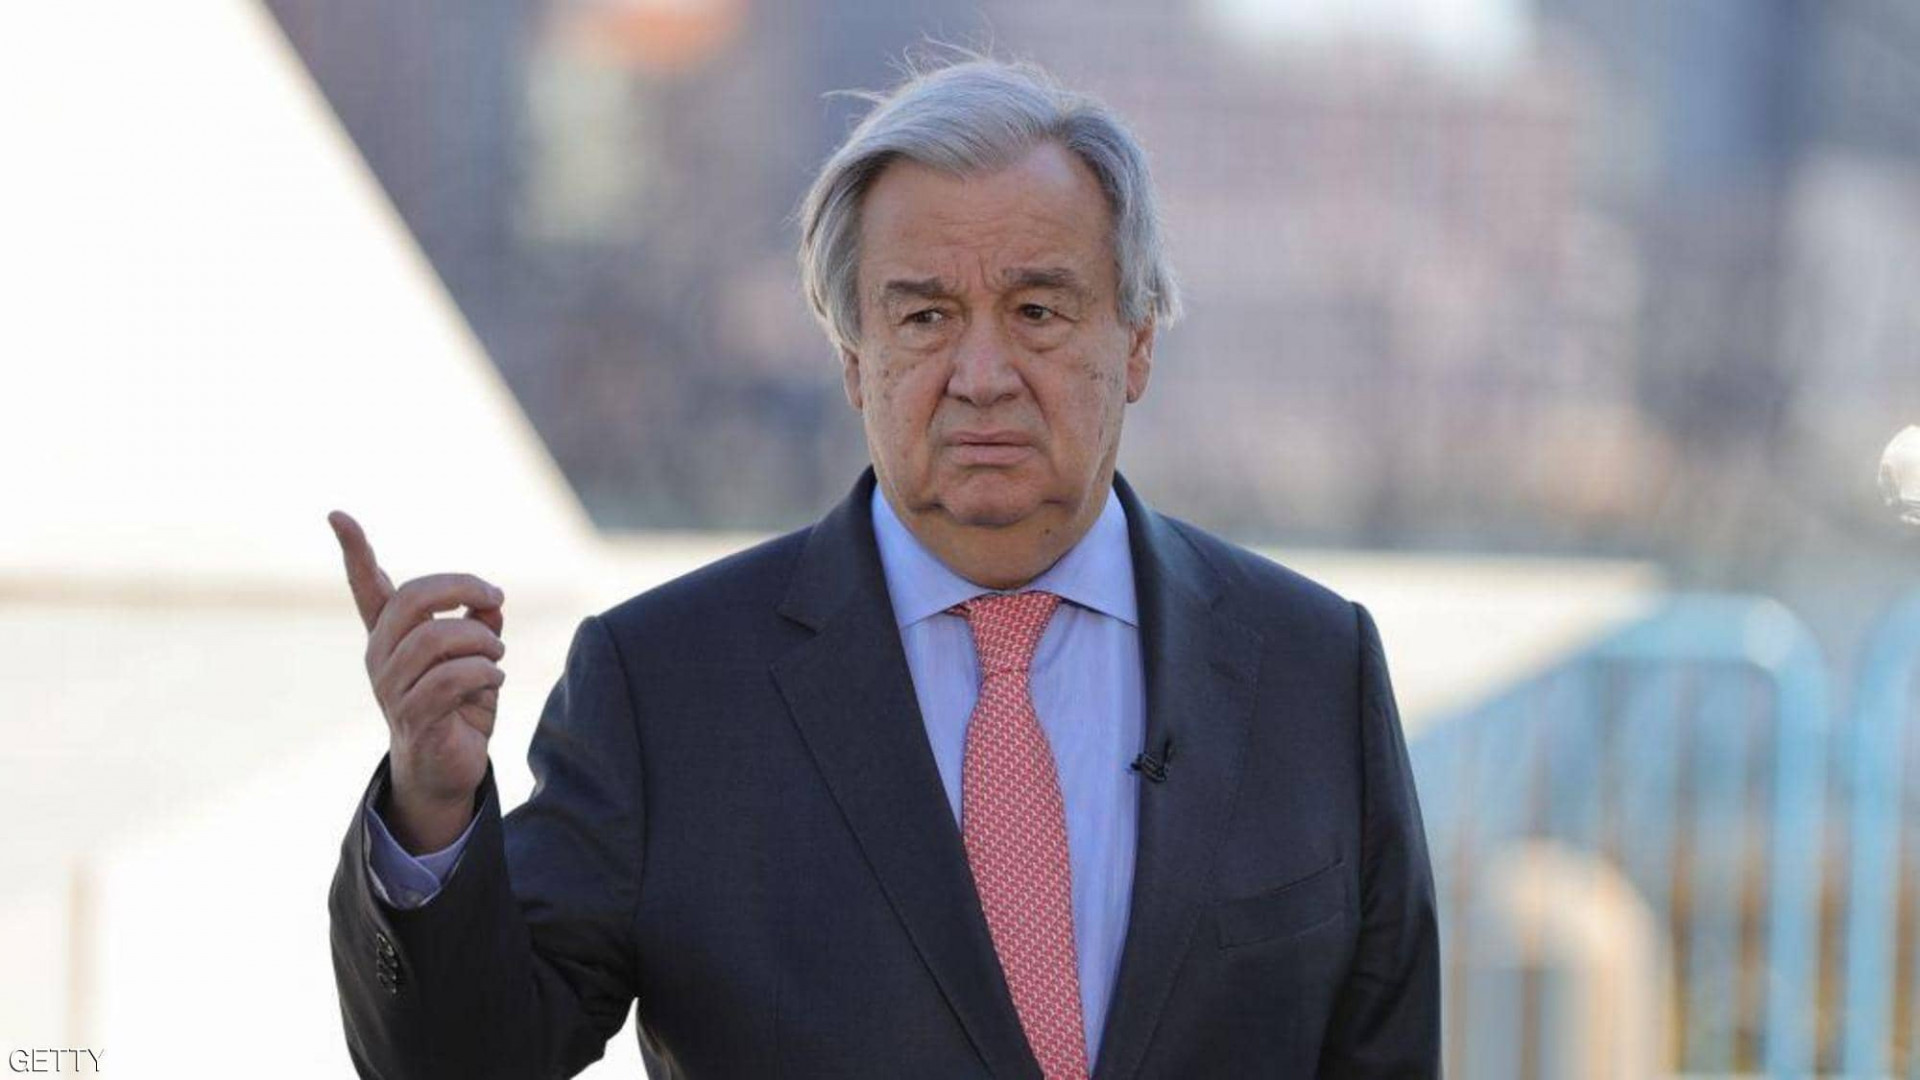 UN Chief urges end to 'dangerous cycle of retaliation' in Middle East